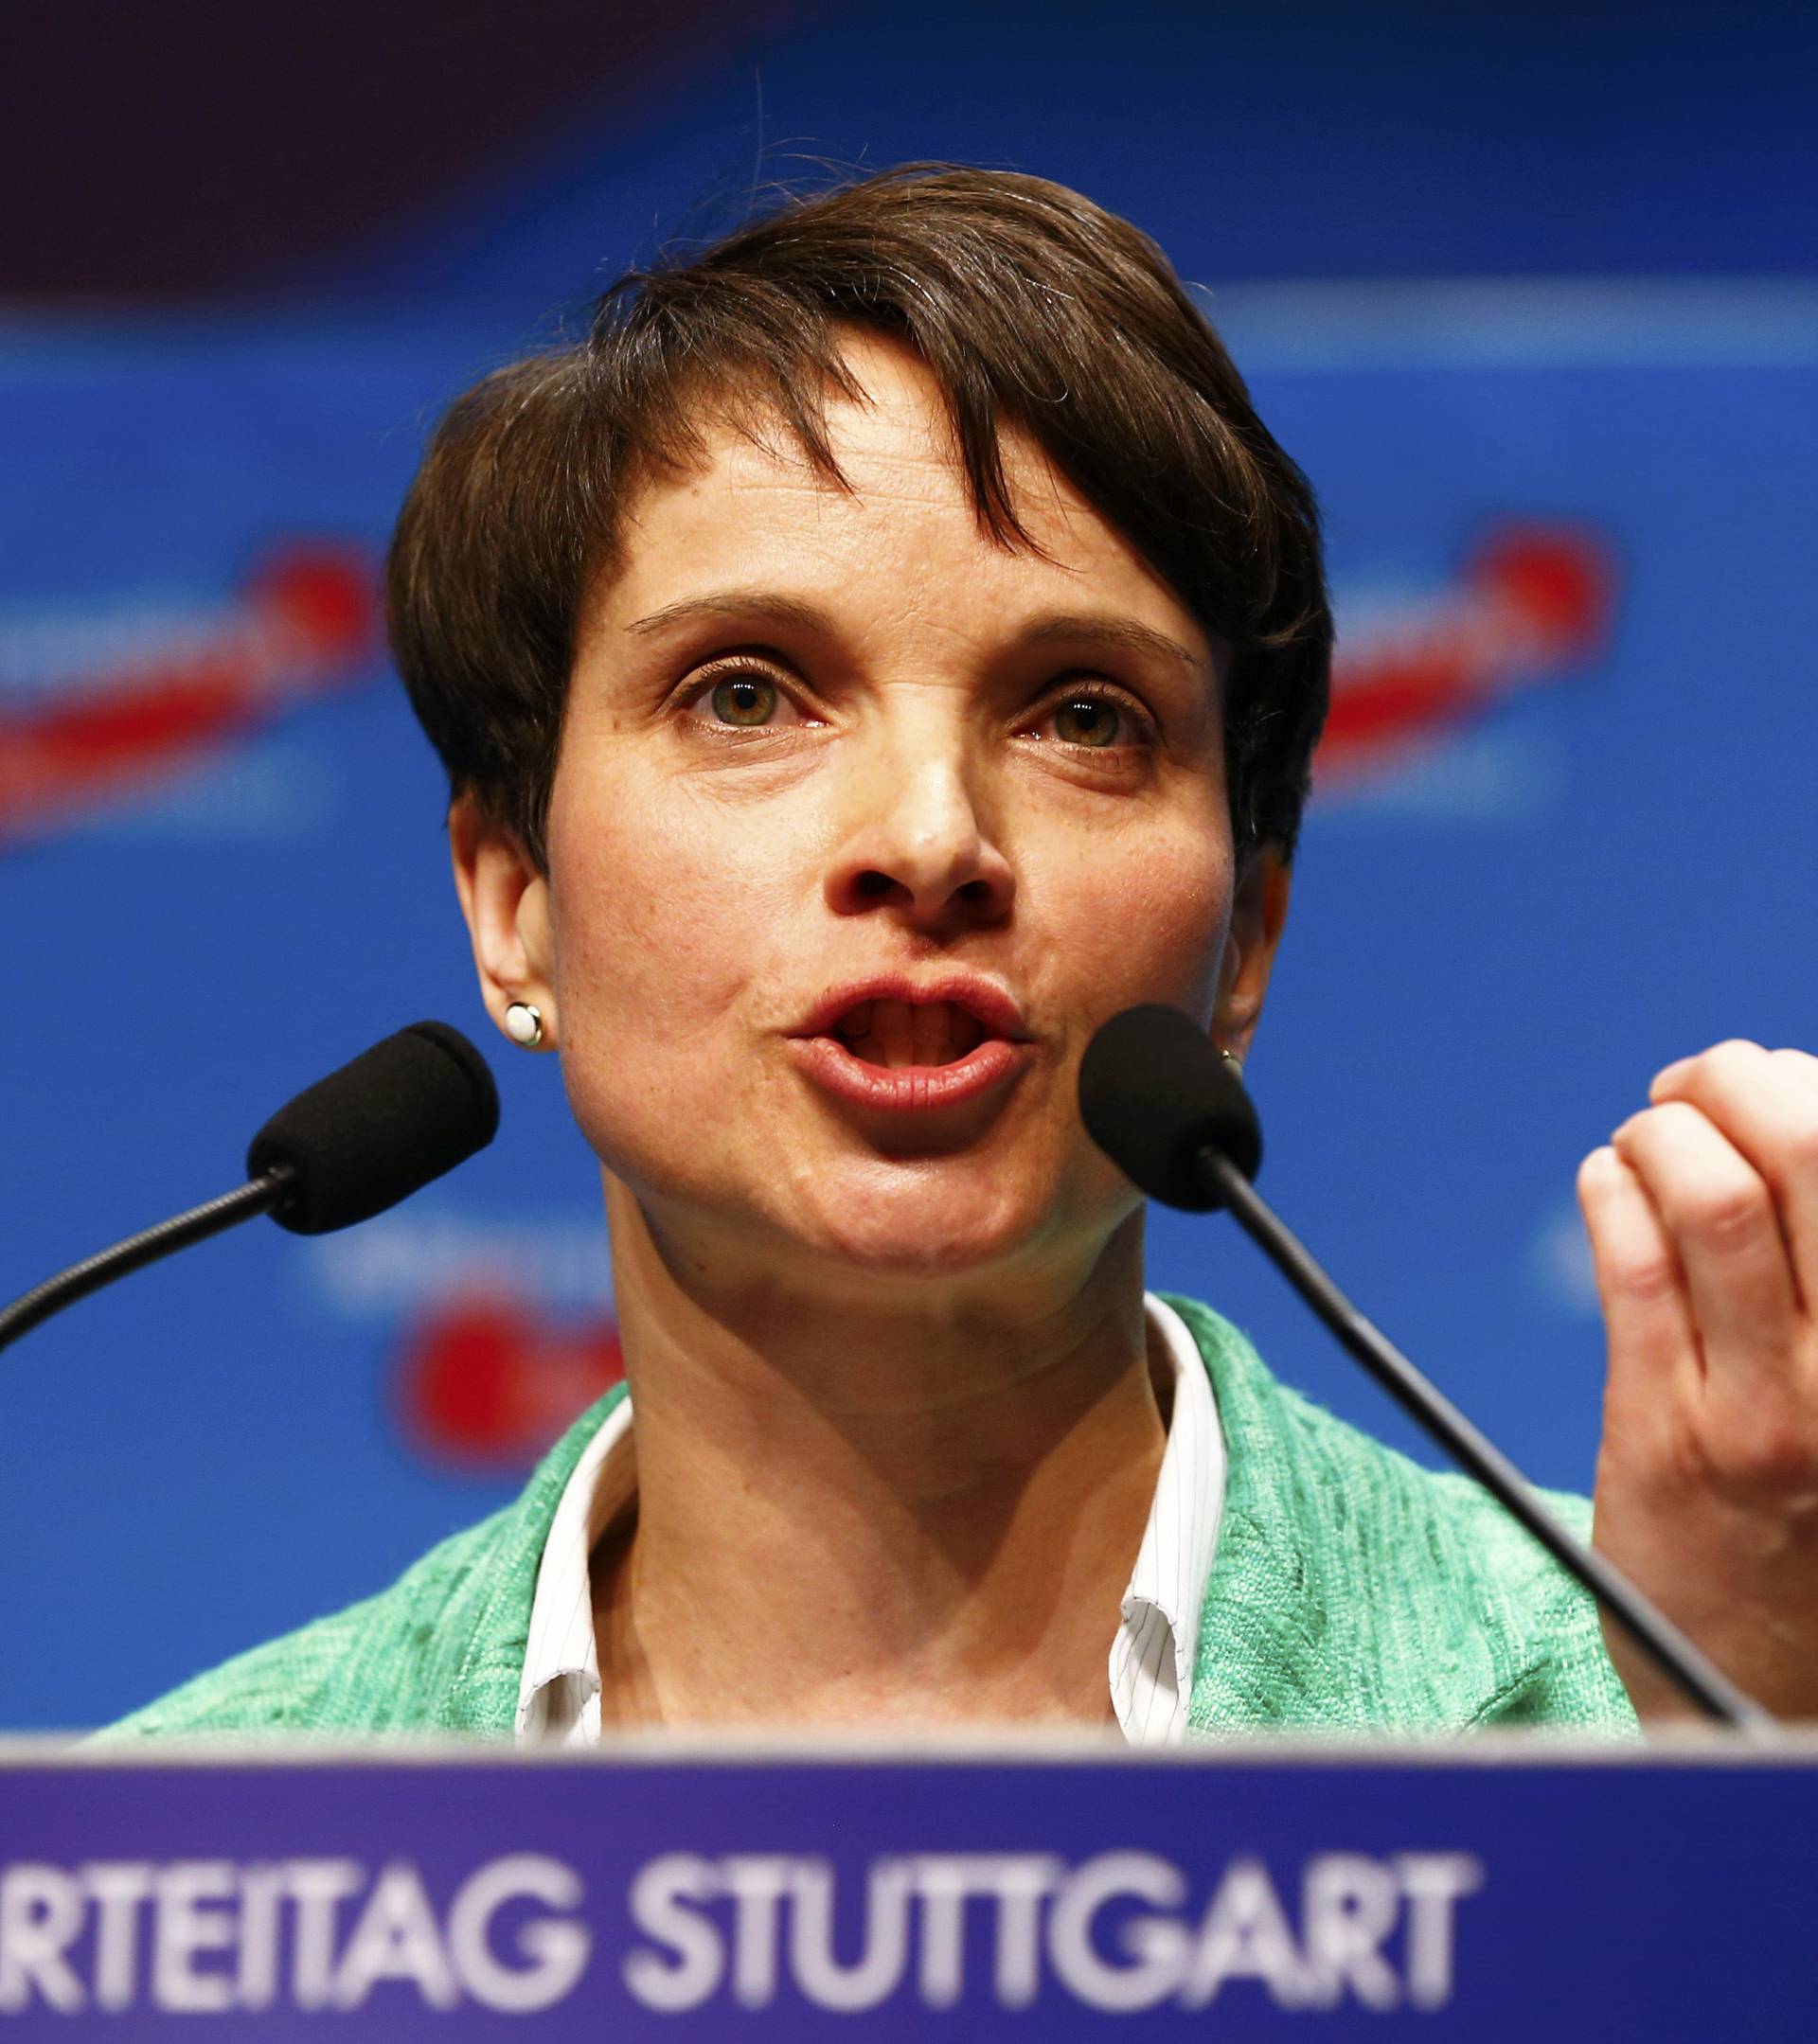 Petry, chairwoman of the anti-immigration party Alternative for Germany (AfD), speaks during the AfD congress in Stuttgart